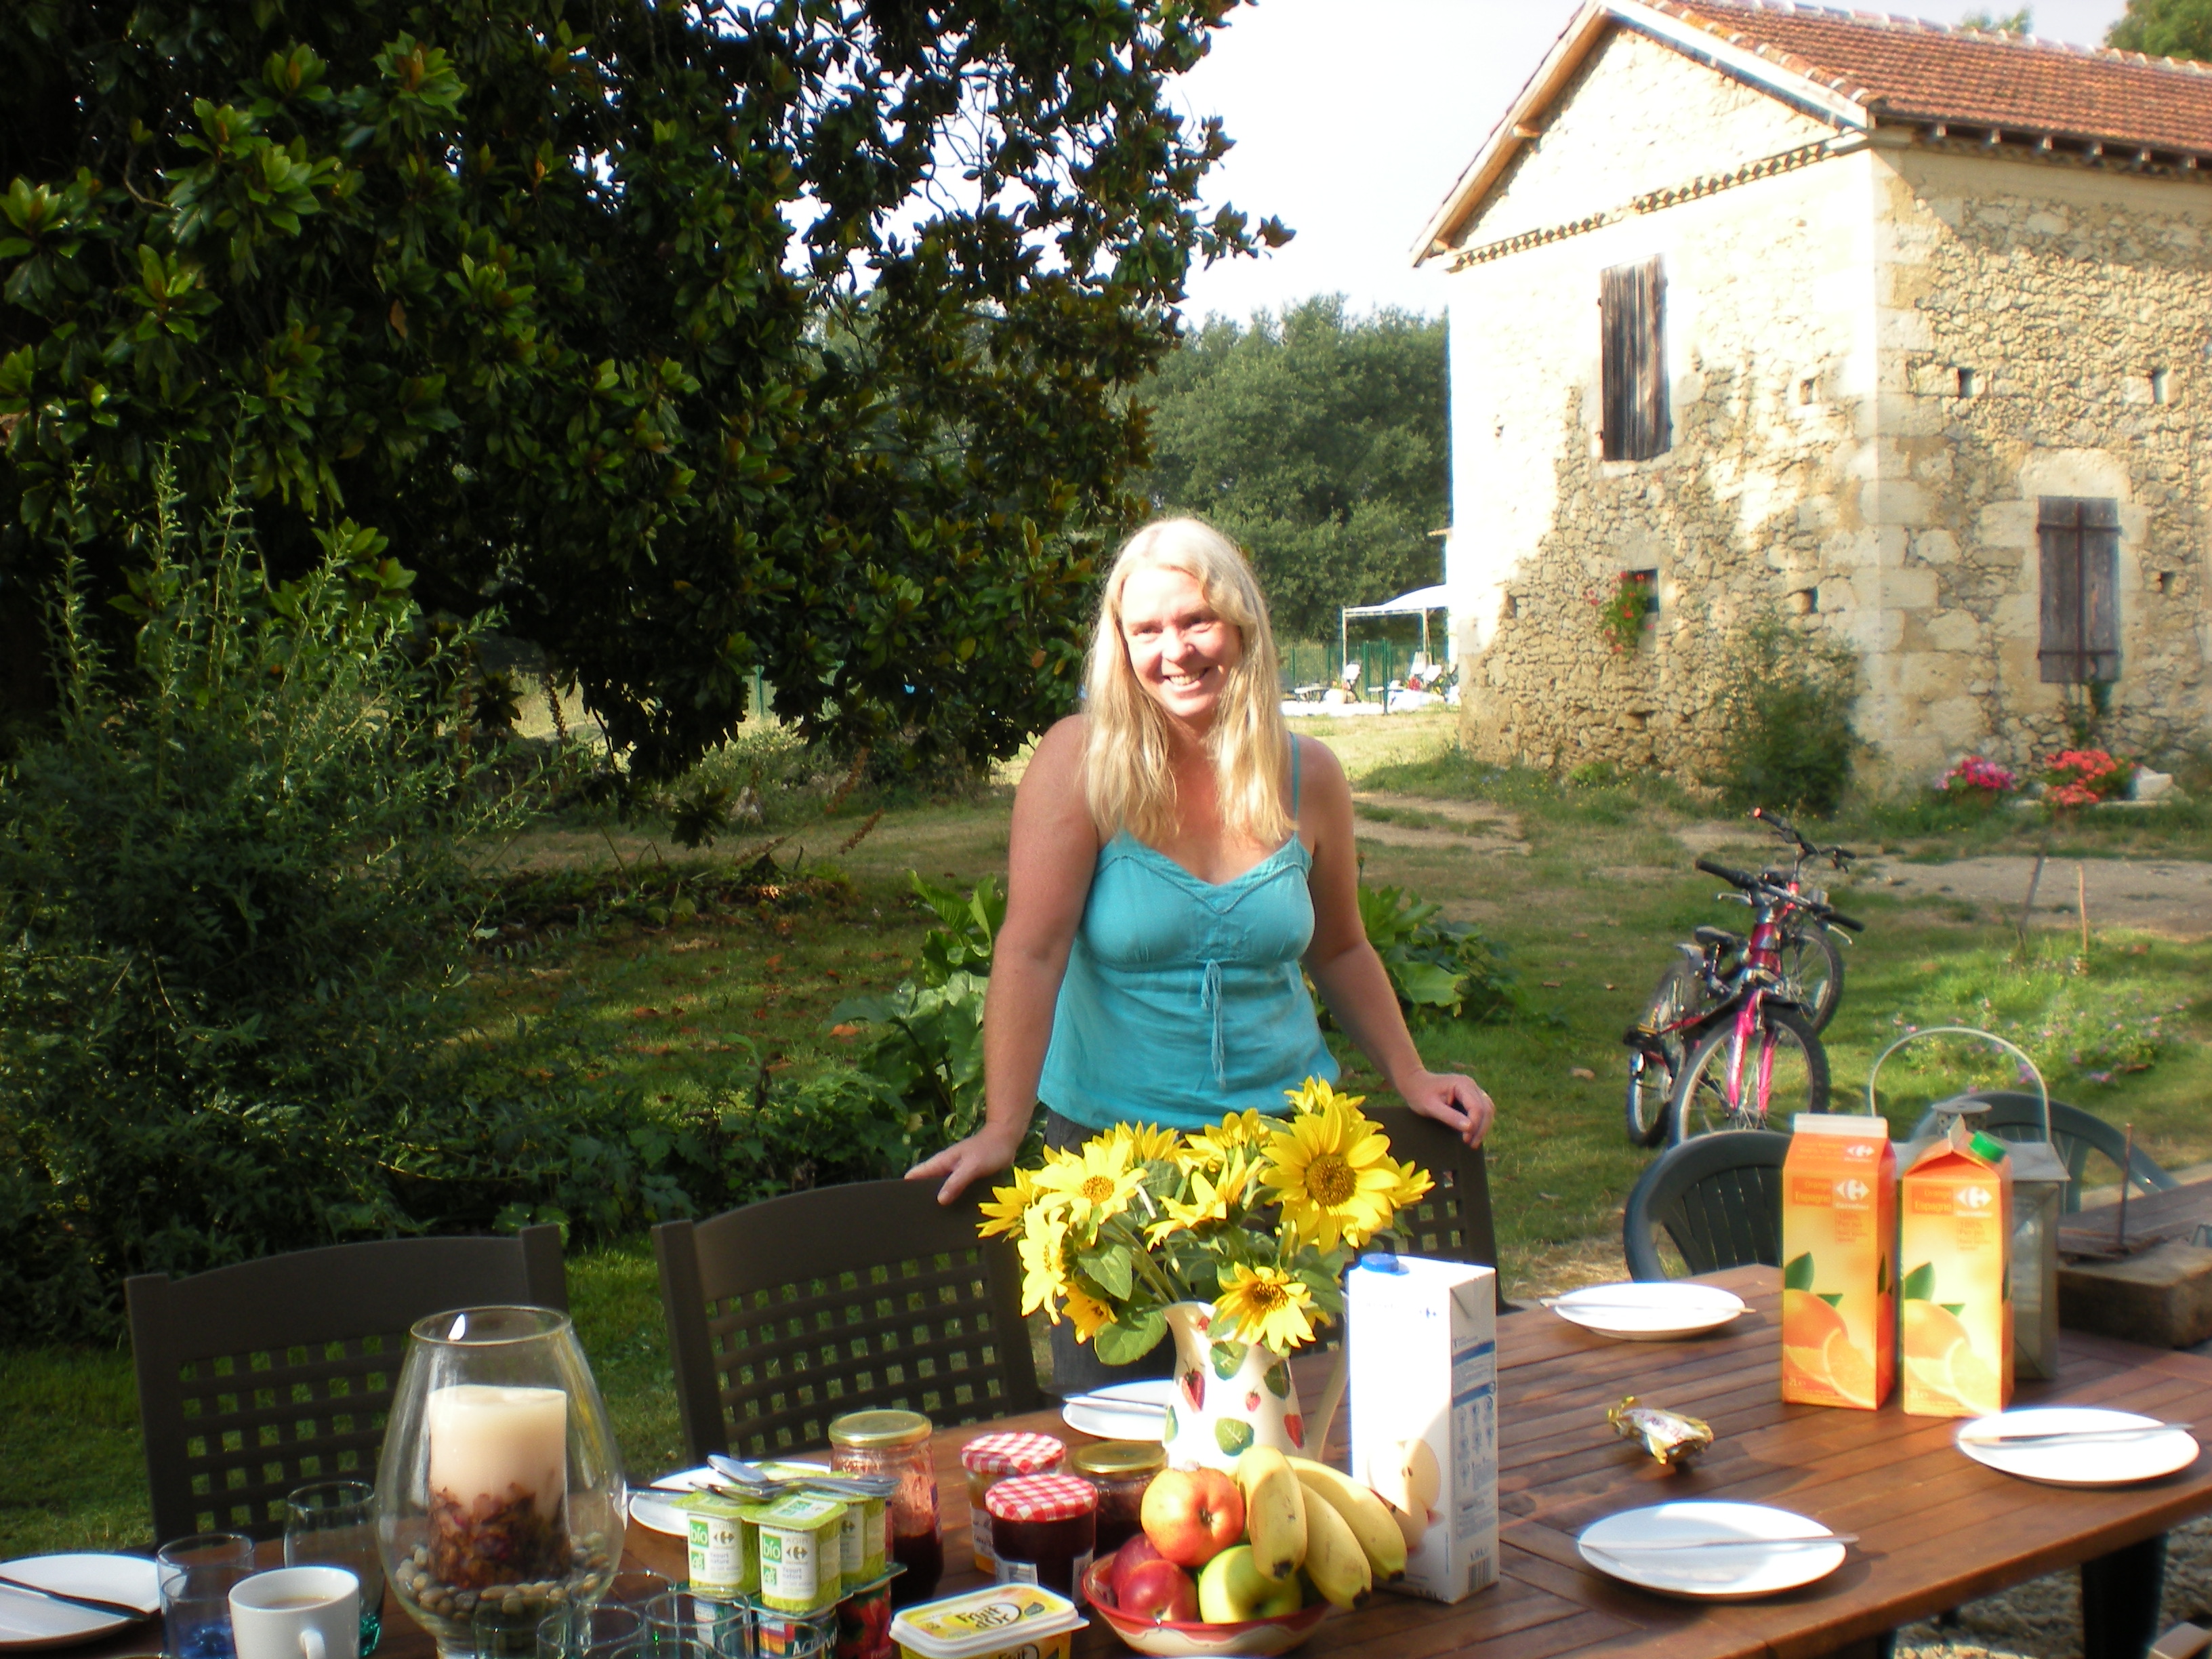 Lots of outside dining opportunities at Barrusclet farmhouse gite